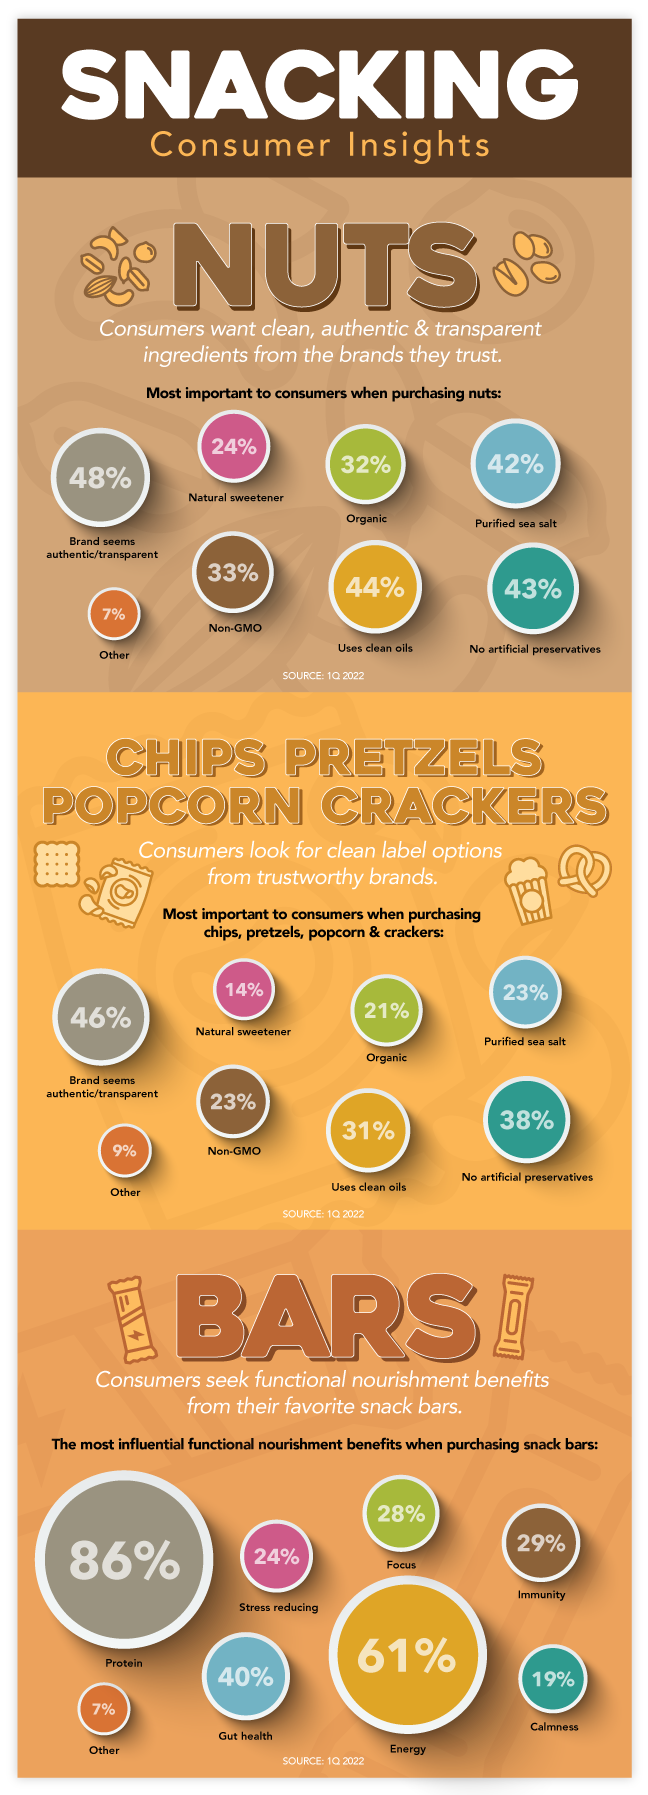 Snacking Consumer Insights